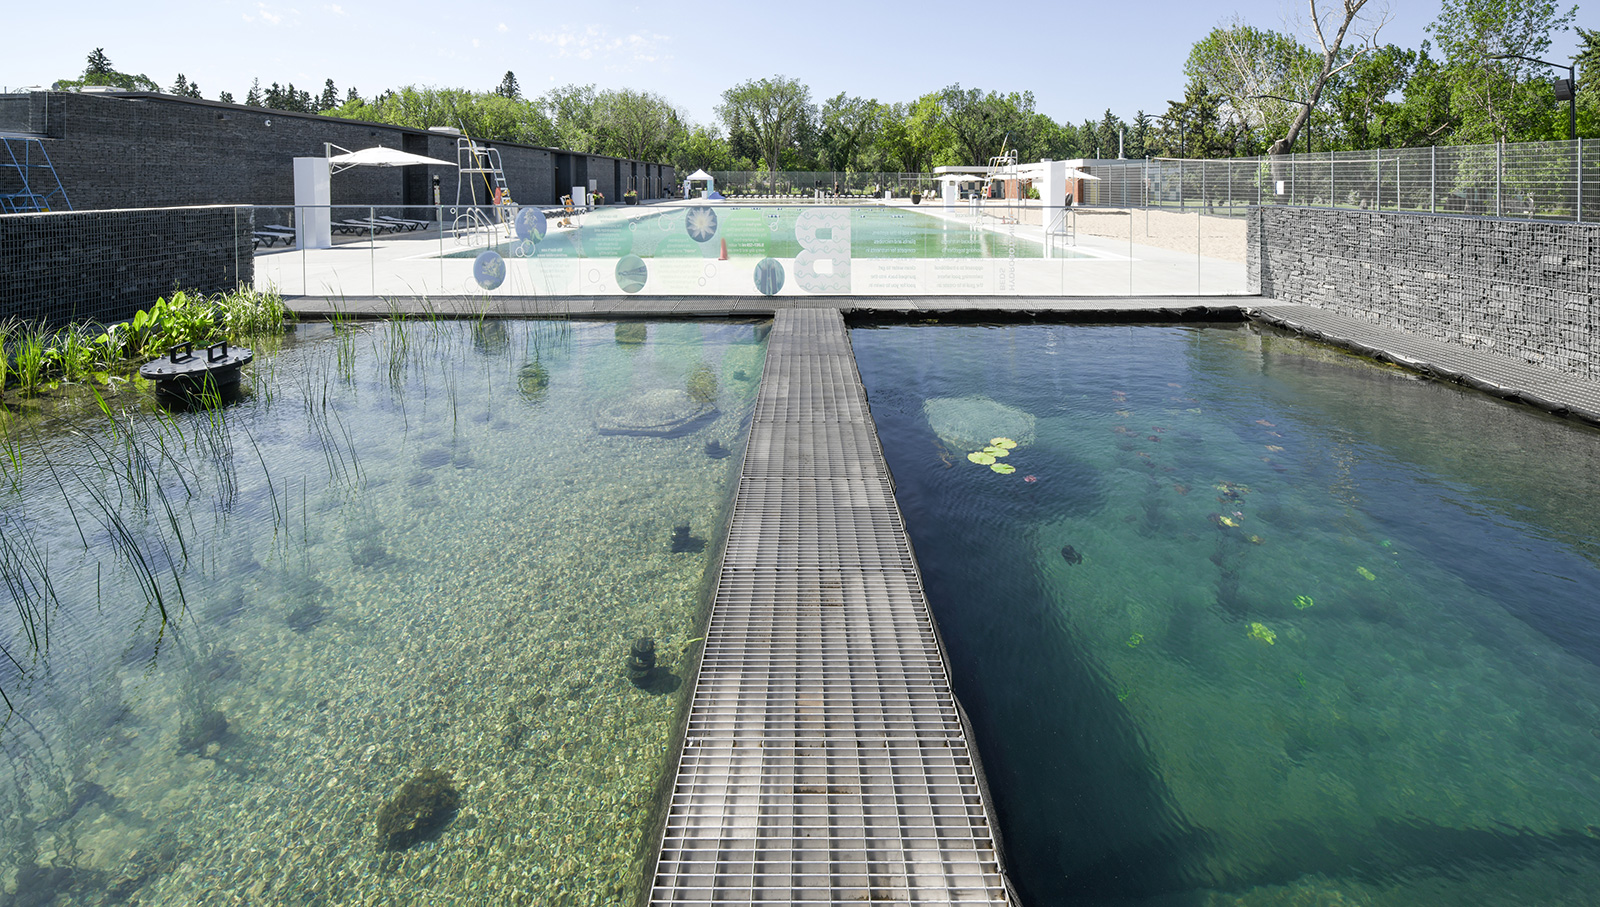 This 'living' swimming pool is a first in Canada designed by gh3